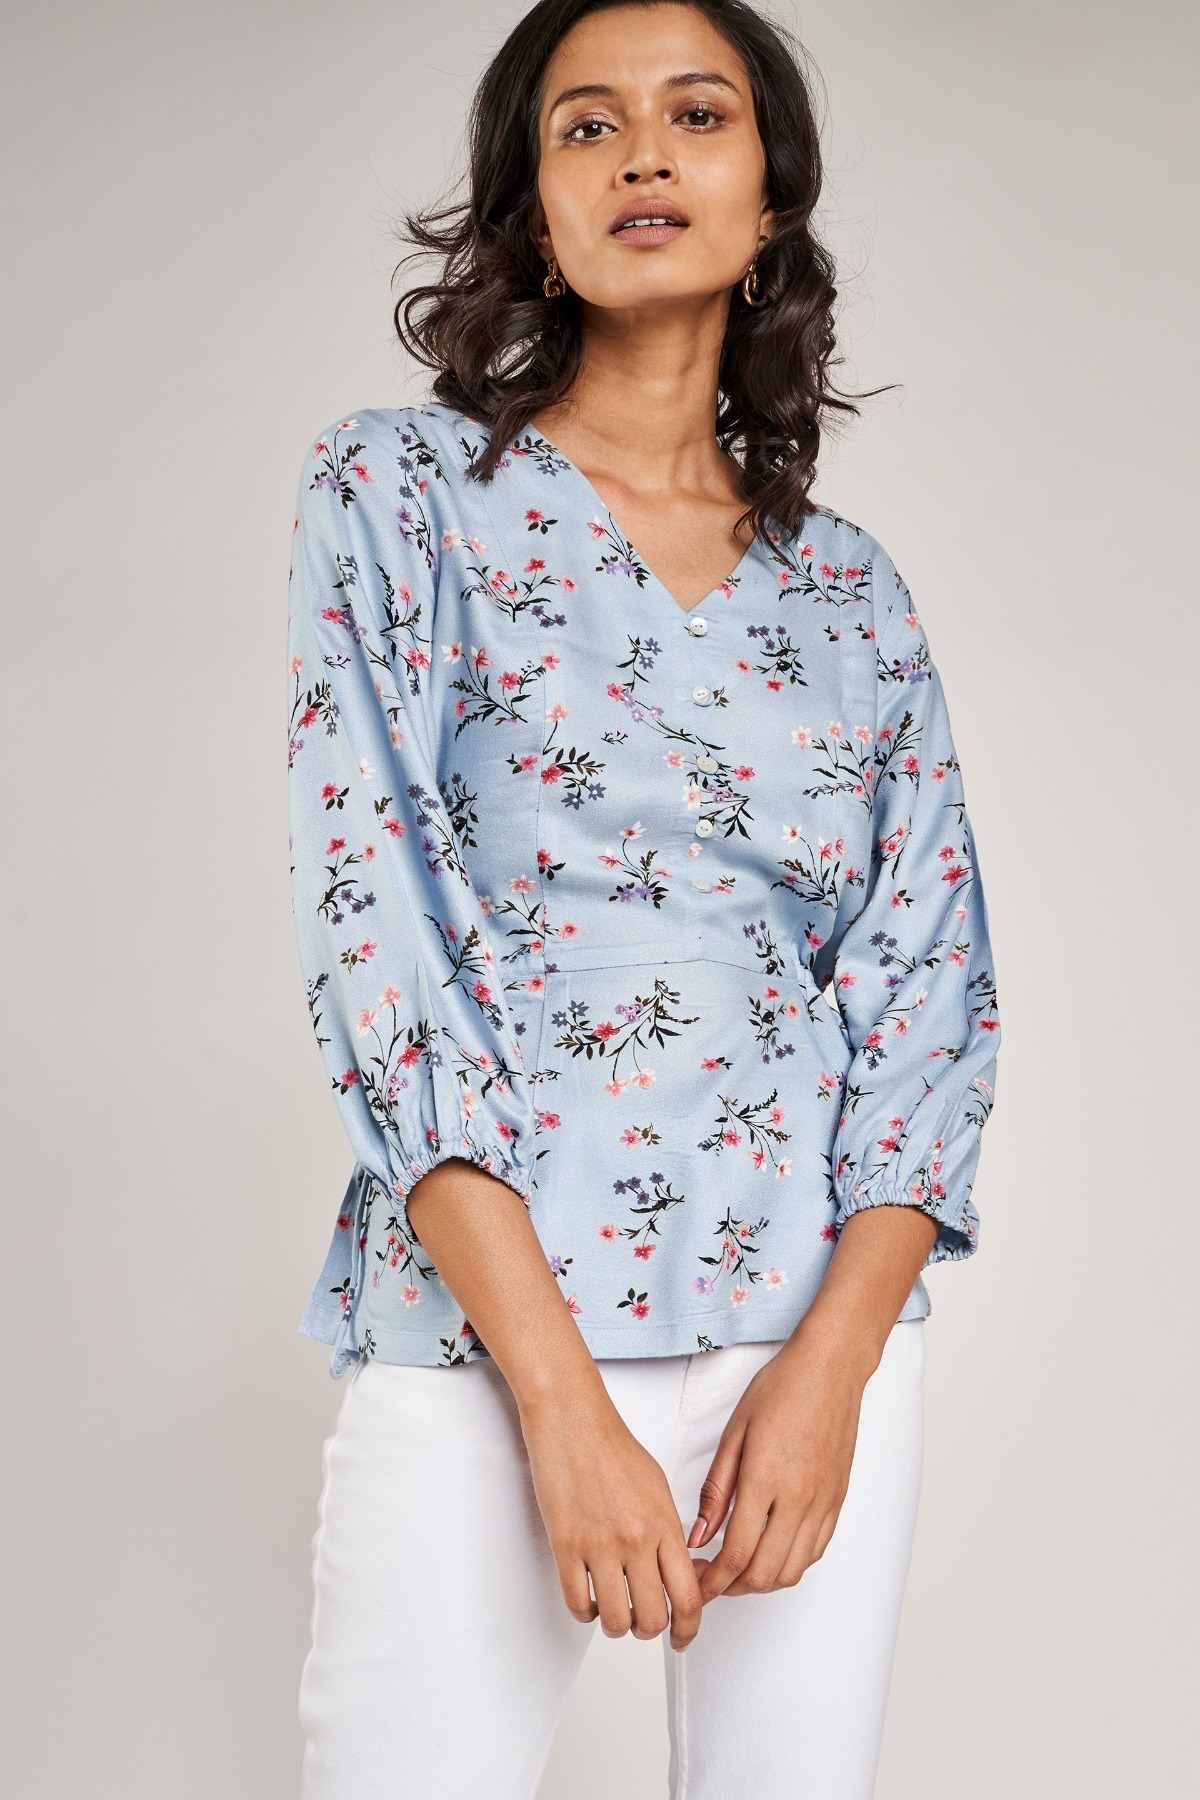 AND | Powder Blue Floral Printed Peplum Top 0